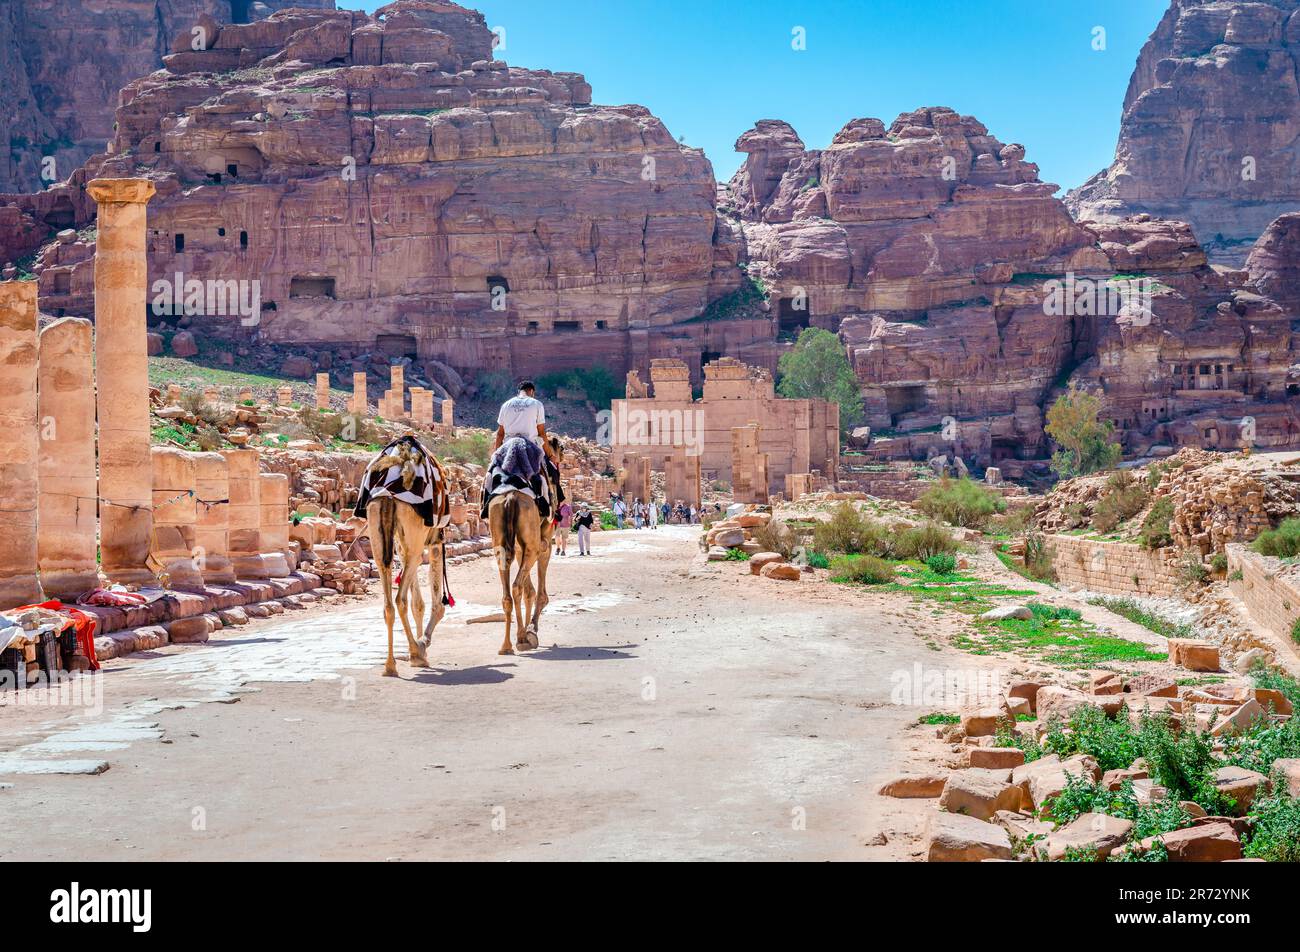 The Colonnade Street that runs through Petra, with many unexcavated sites on either side and the temple of Qasr al-Bint up front. Jordan. Stock Photo